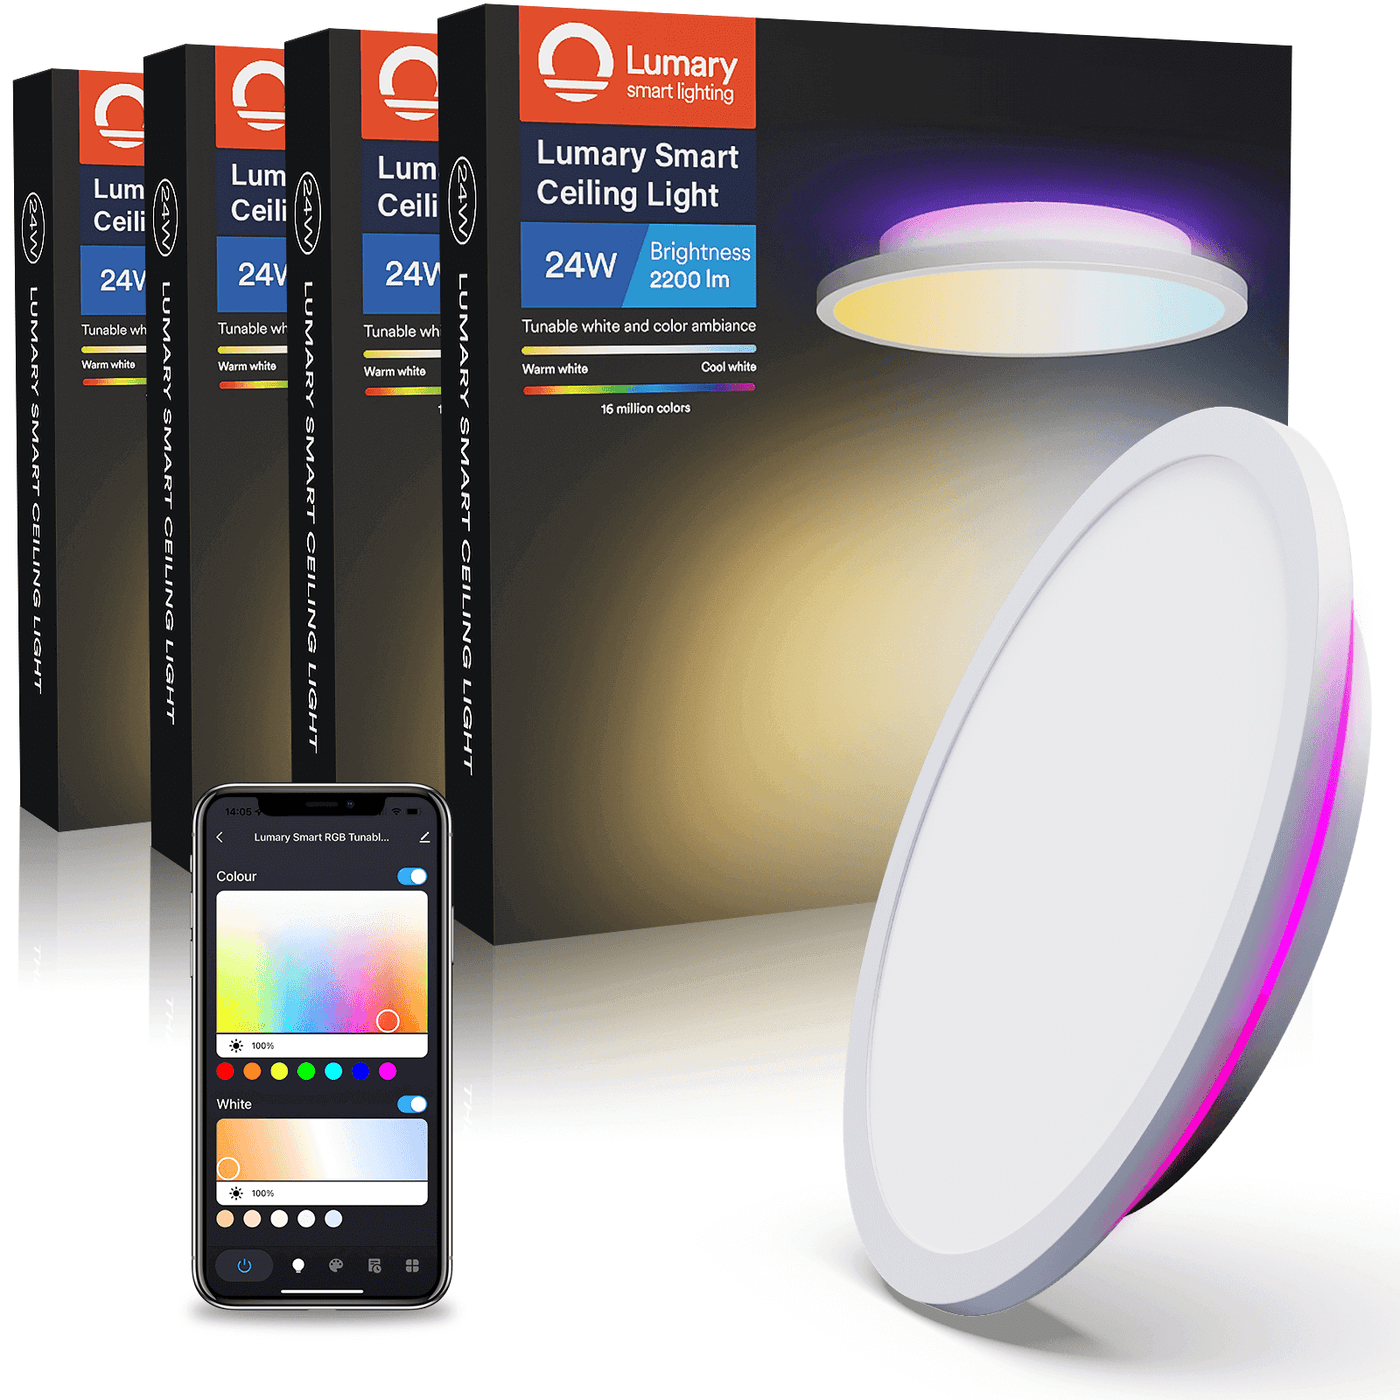 Lumary WiFi Smart Ceiling Light With Ambient Light 24W - Lumary